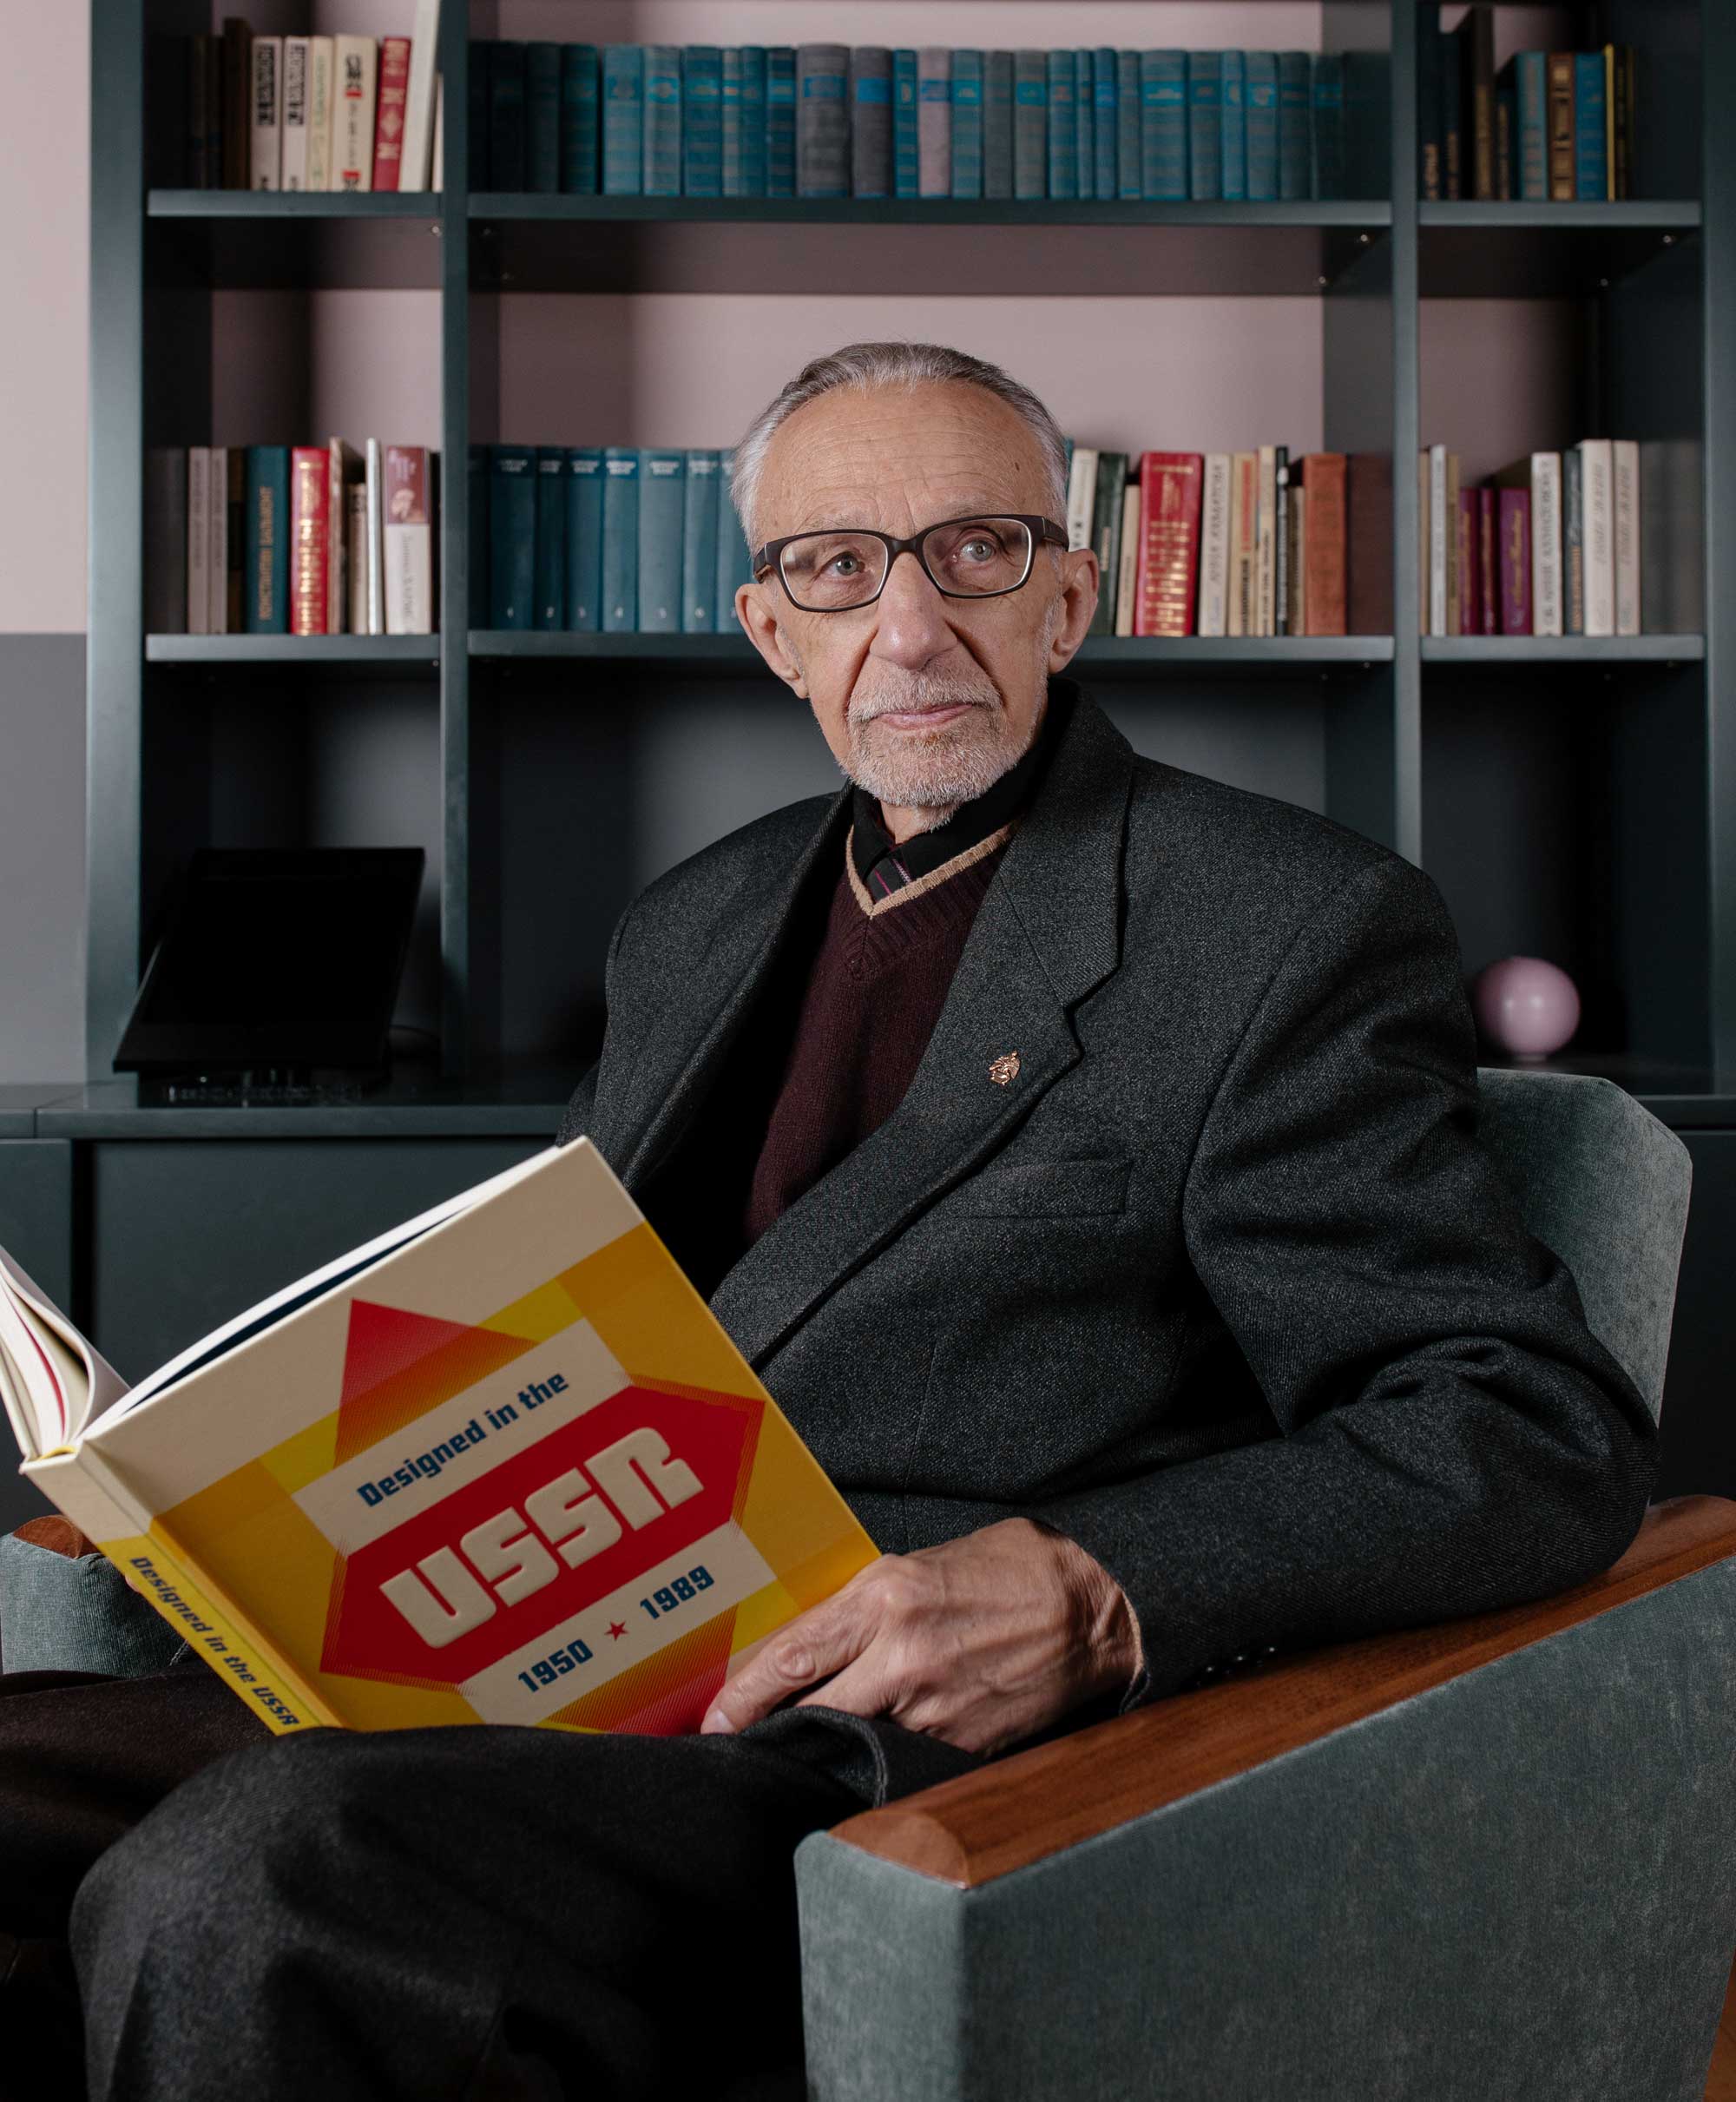 Vladimir Runge, one of the designers featured in Designed in the USSR: 1950-1989 holding a copy of the book photographed at the Tretiakov Gallery in Moscow last month